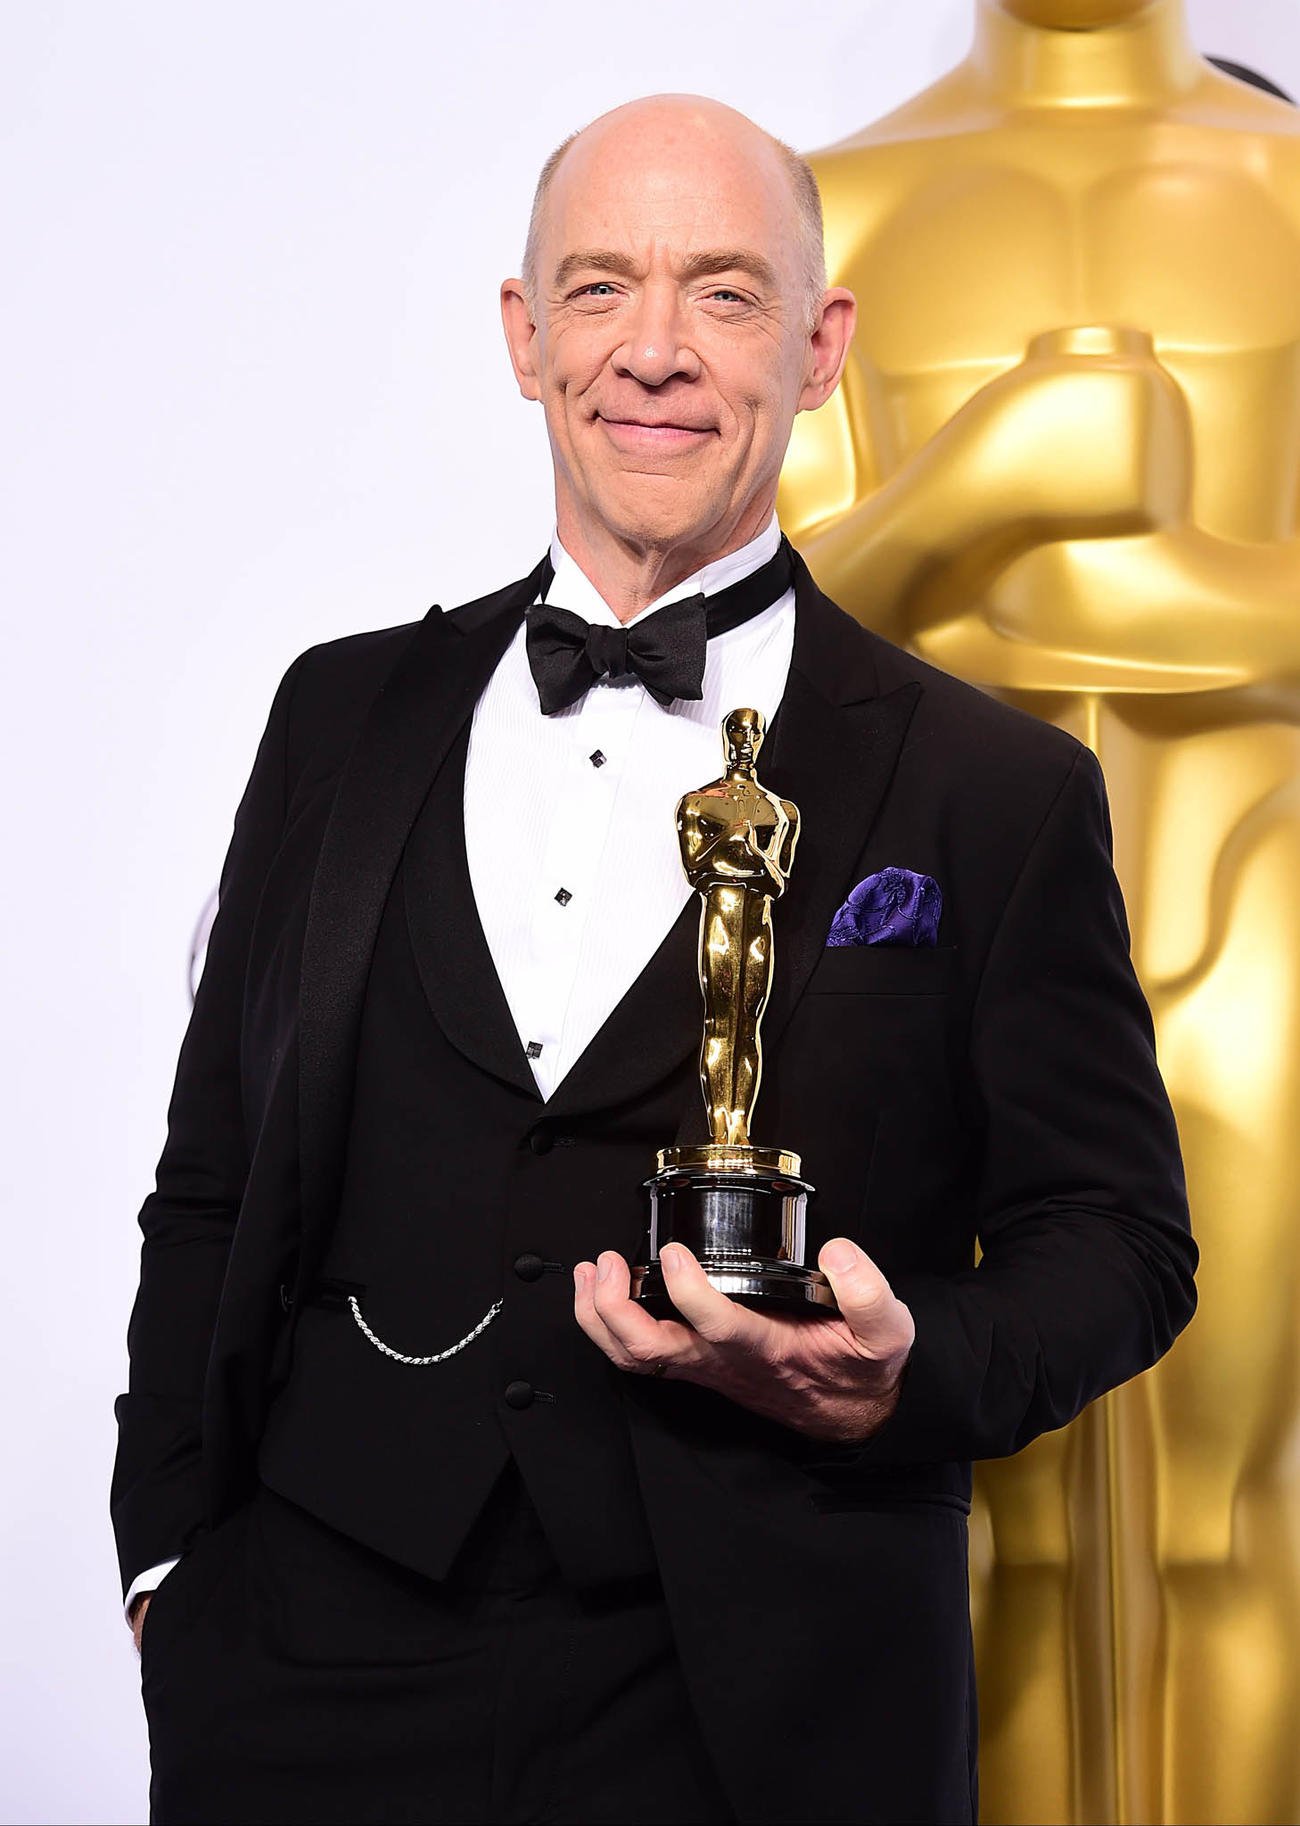 Happy Birthday to J.K. Simmons, who turns 62 today! 